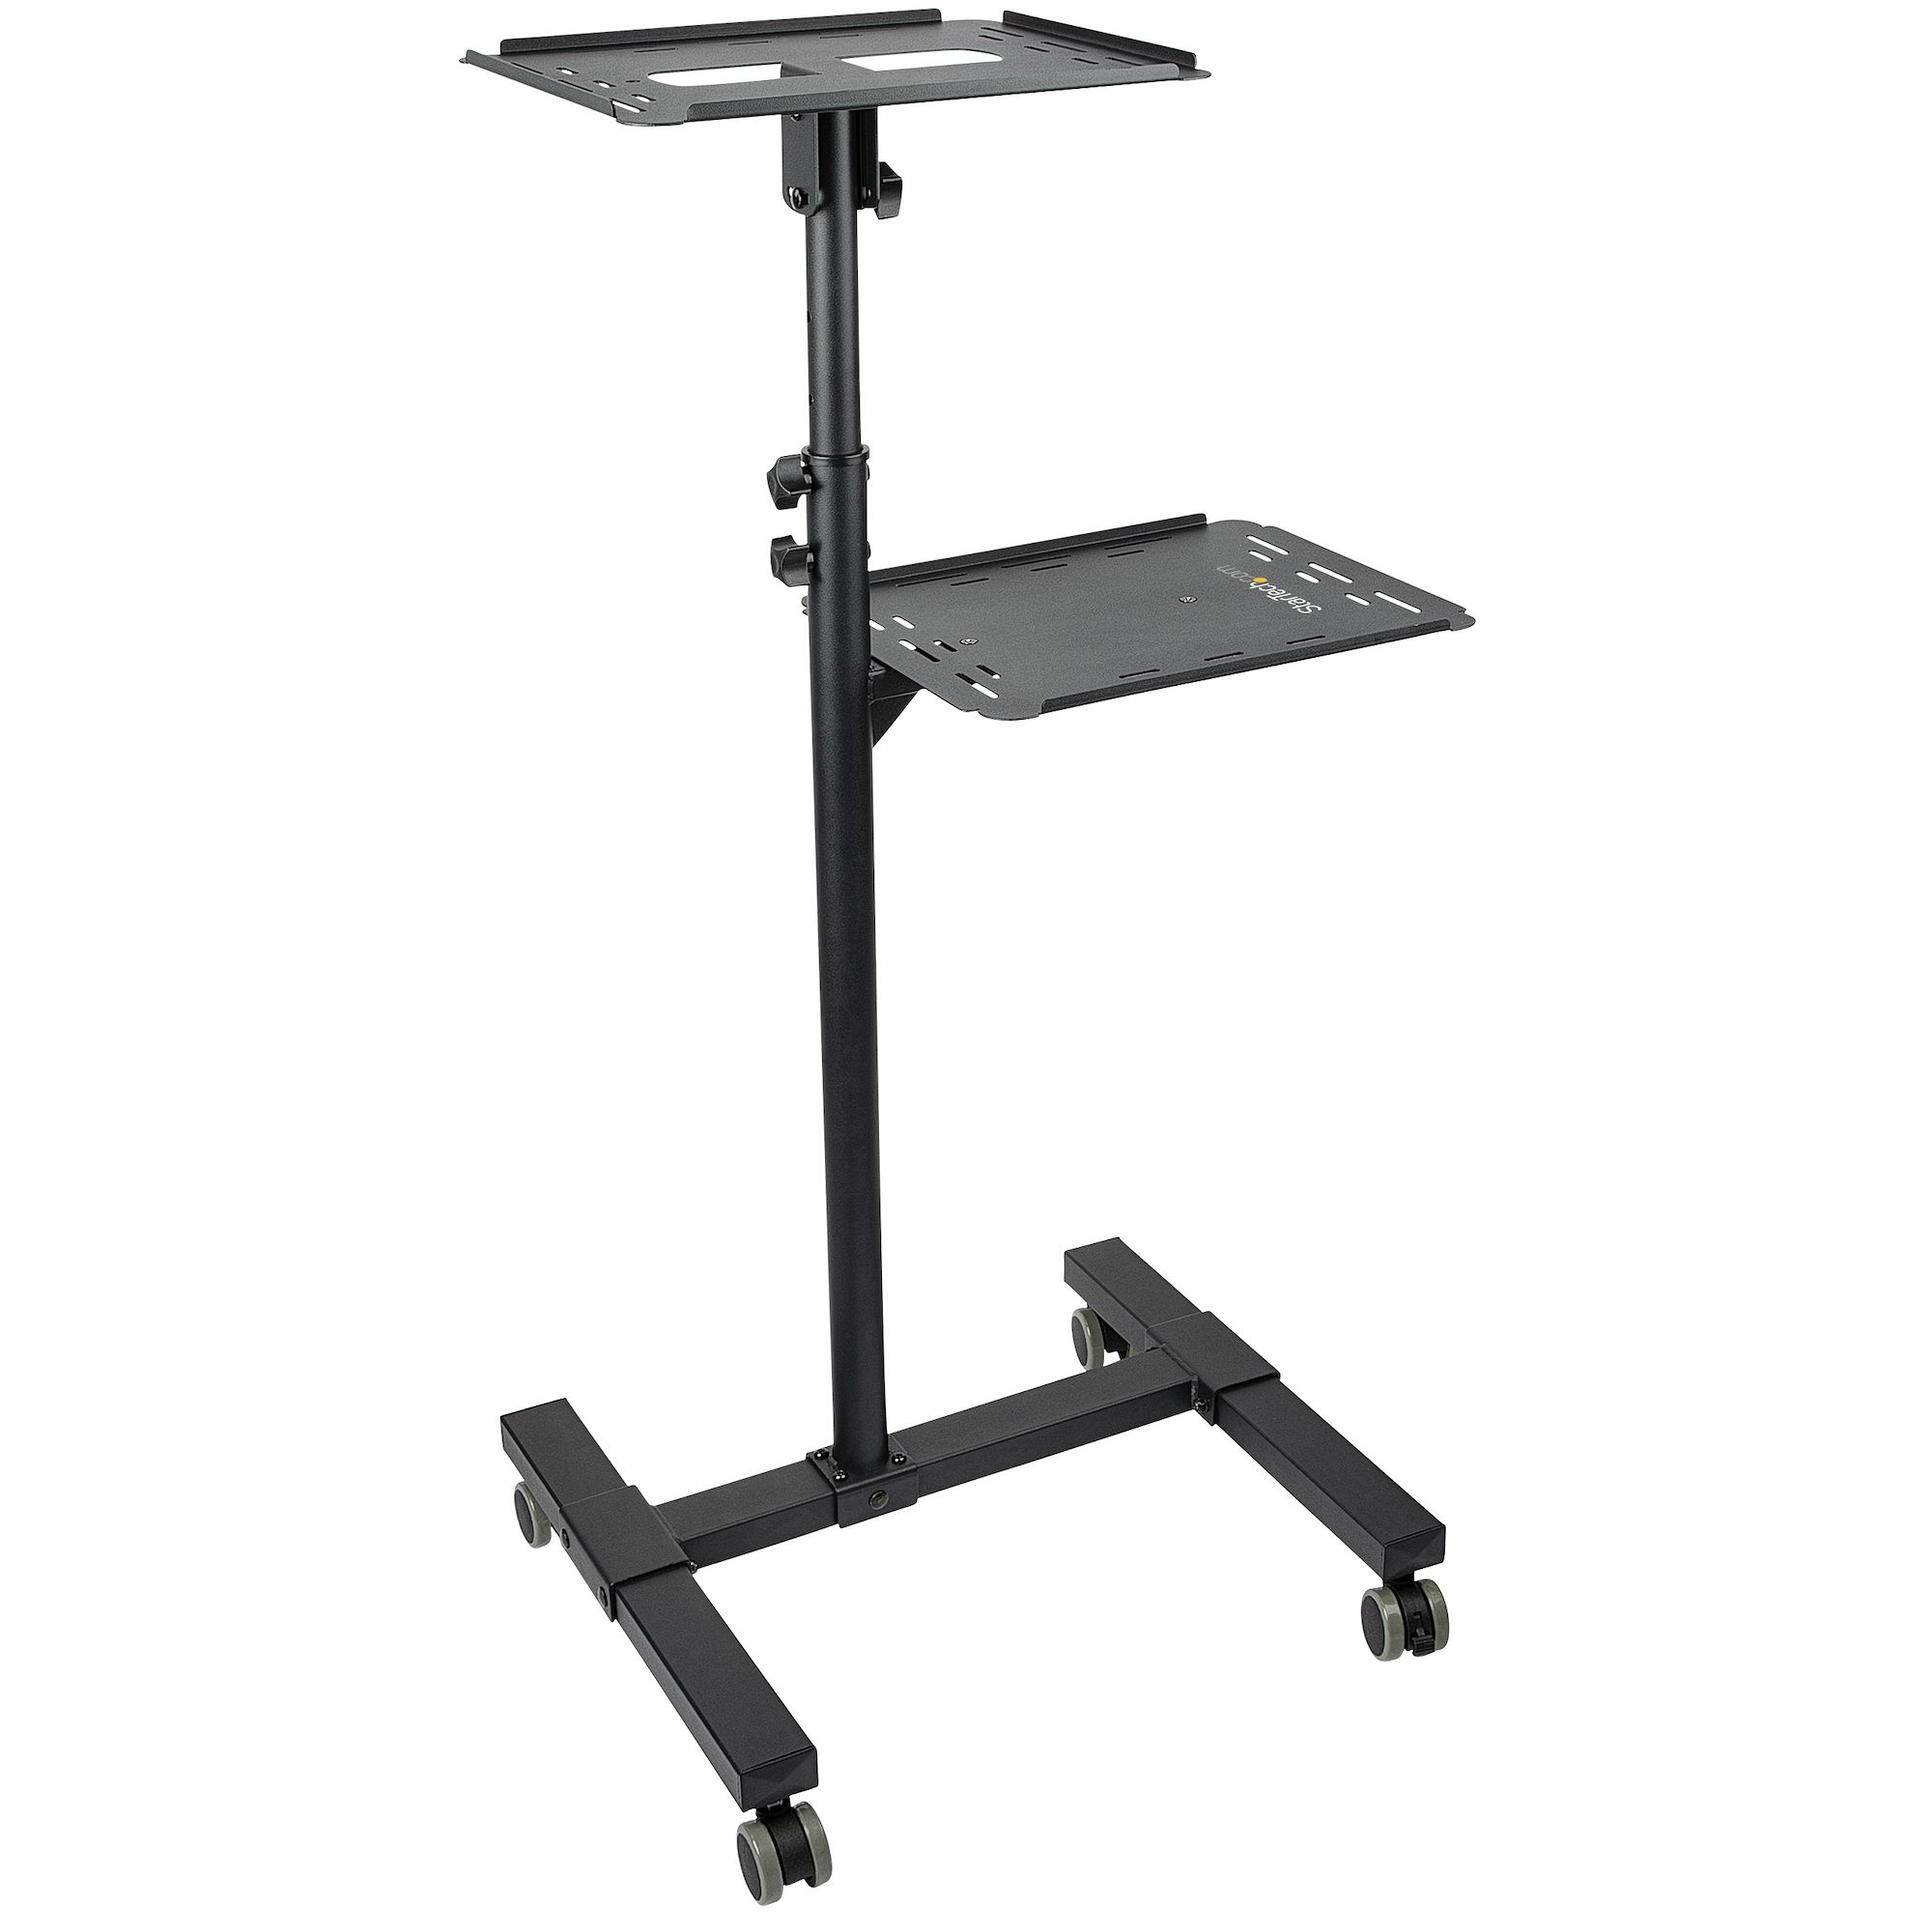 Mobile Projector and Laptop Stand/Cart